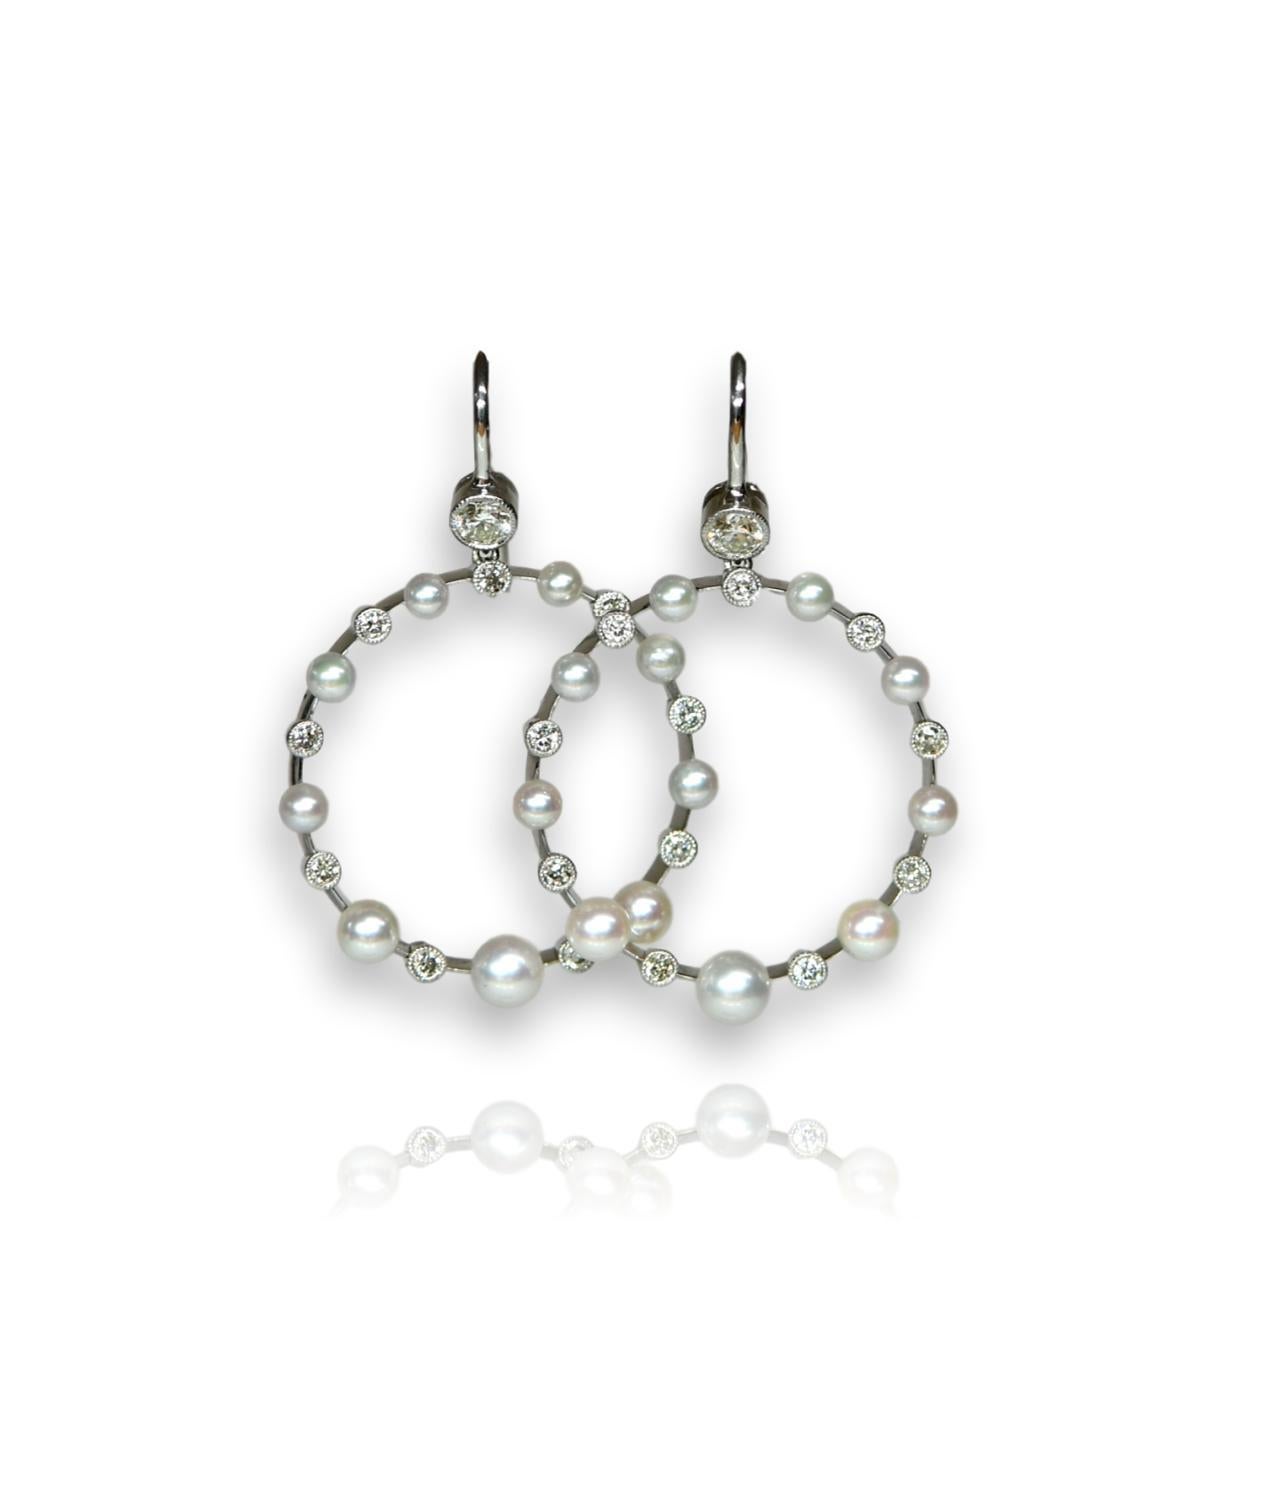 These pretty and elegant earrings were made using an Edwardian design. Each earring has a hoop decorated with nine diamonds and nine pearls. There is such attention to detail in the setting of the diamonds, with each surrounded by a millegrain